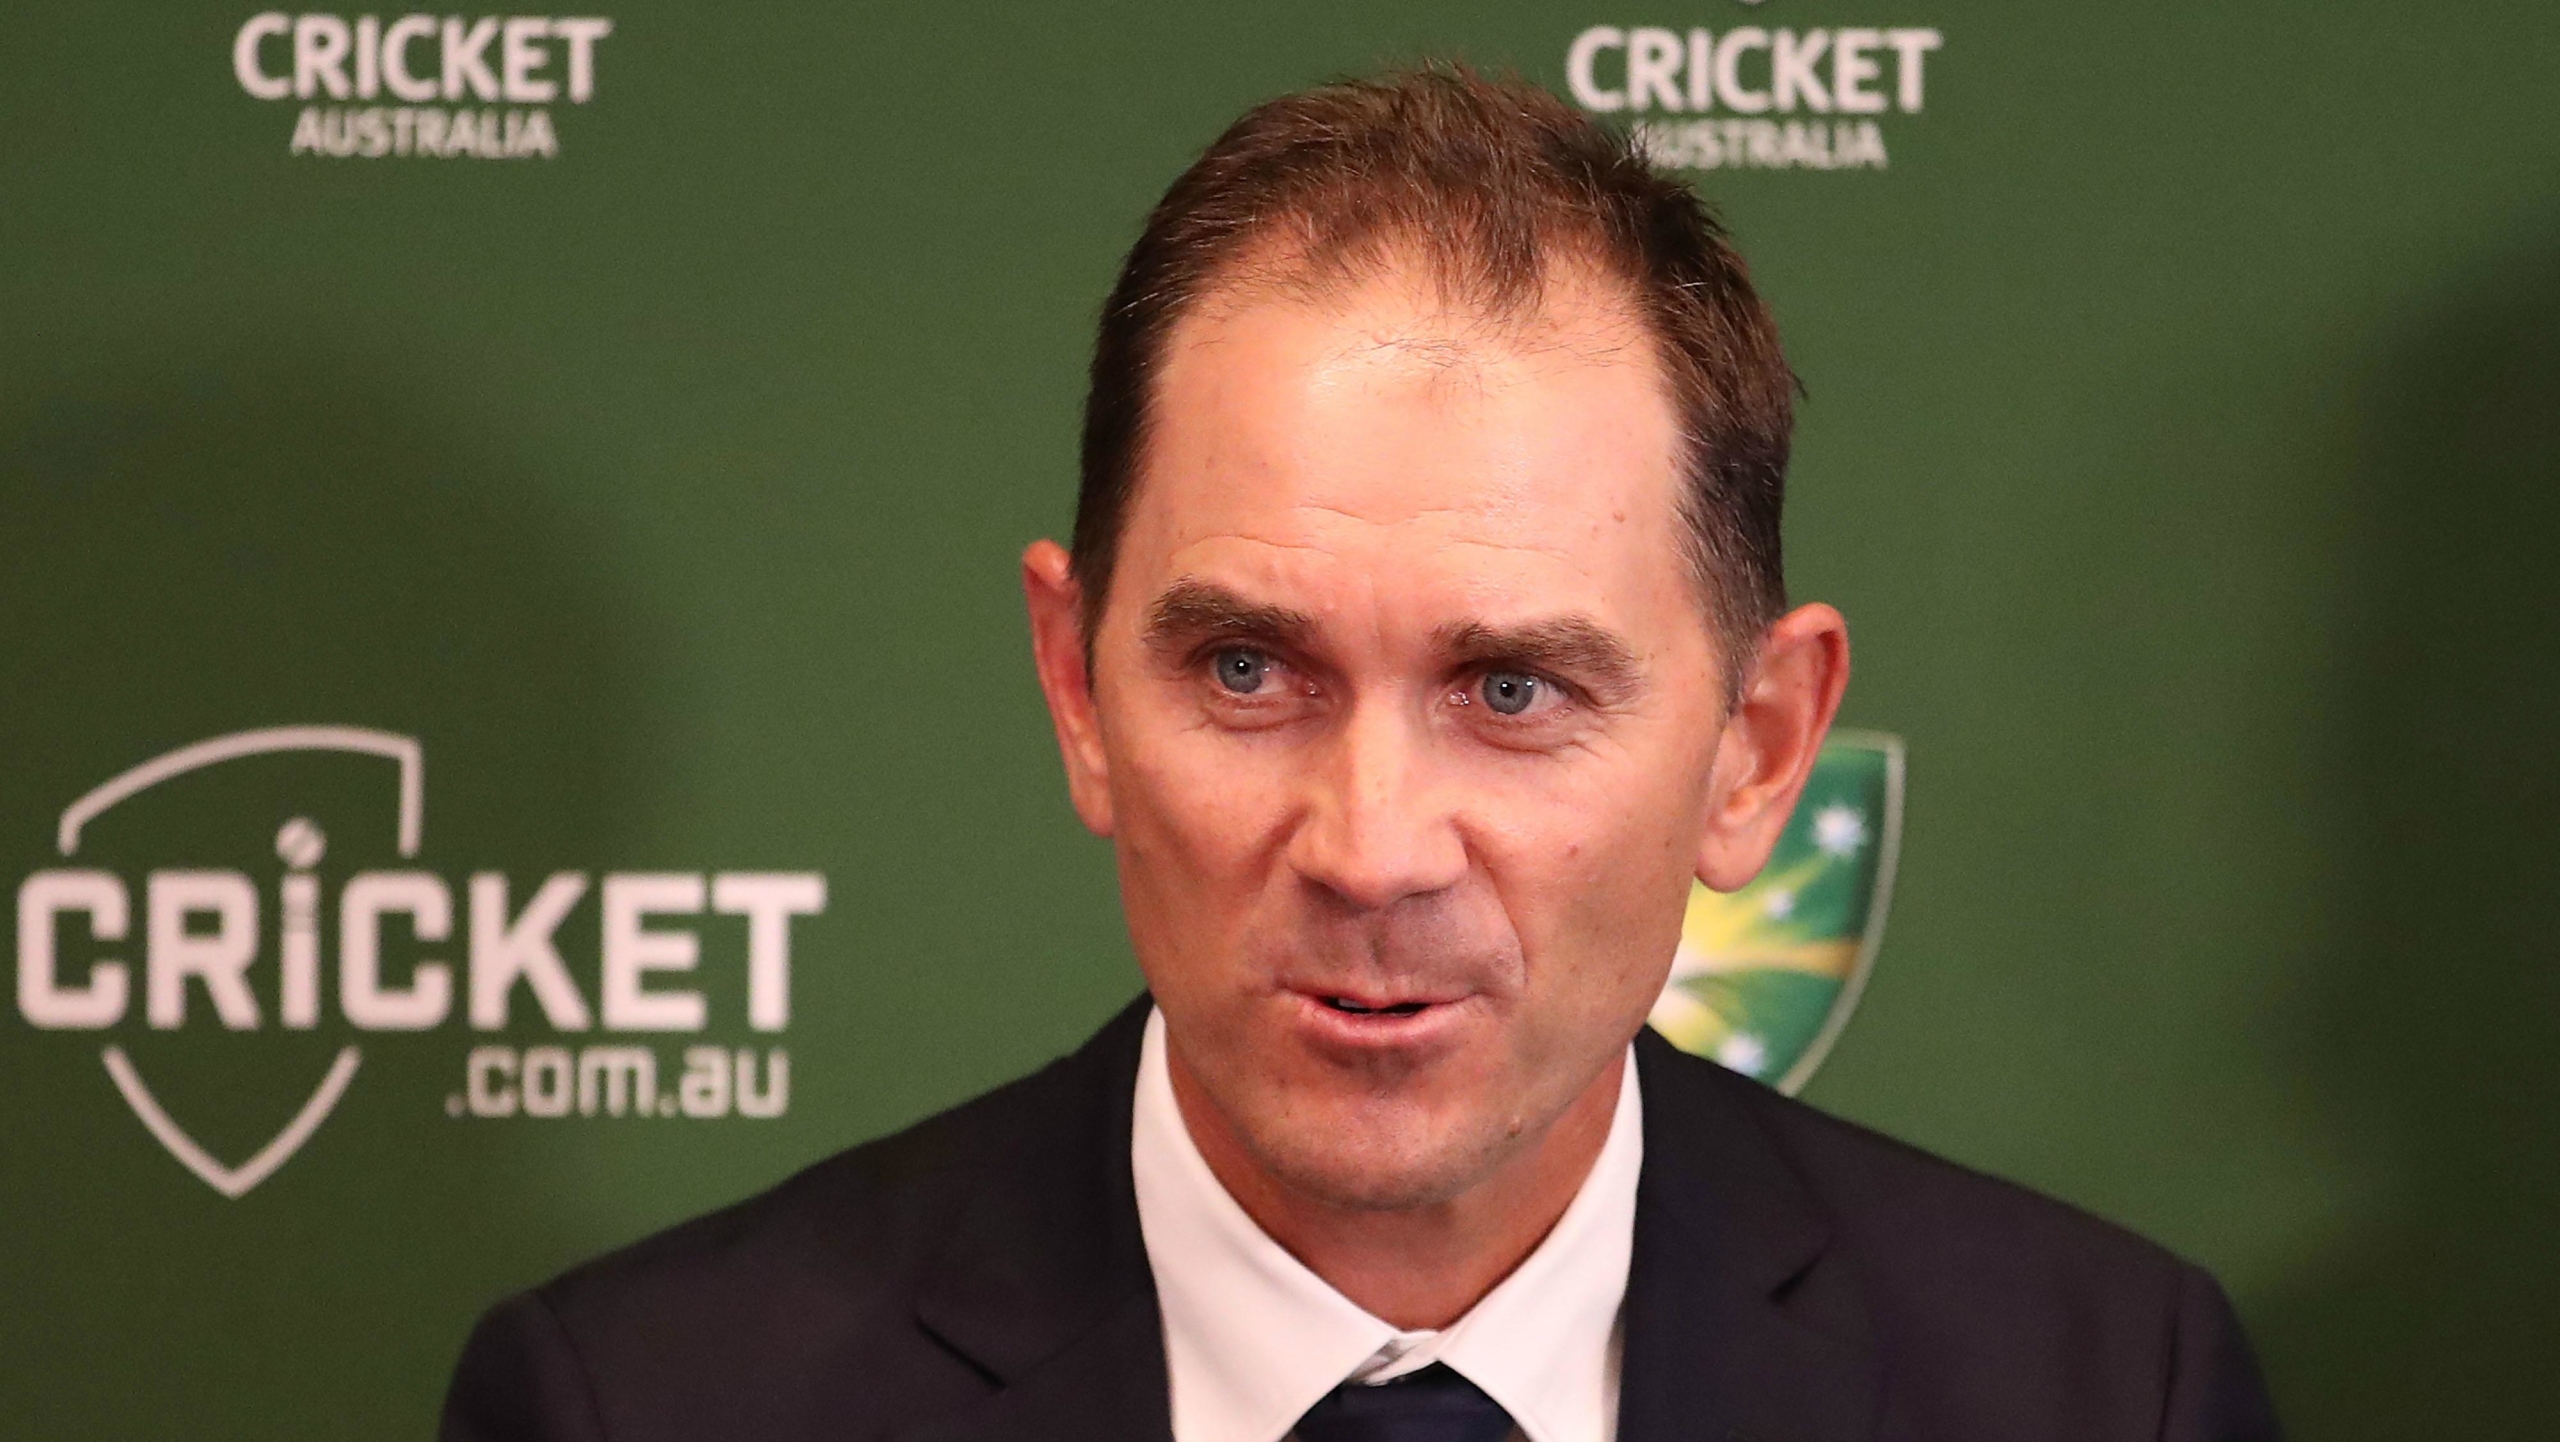 India series was a wake-up call: Justin Langer